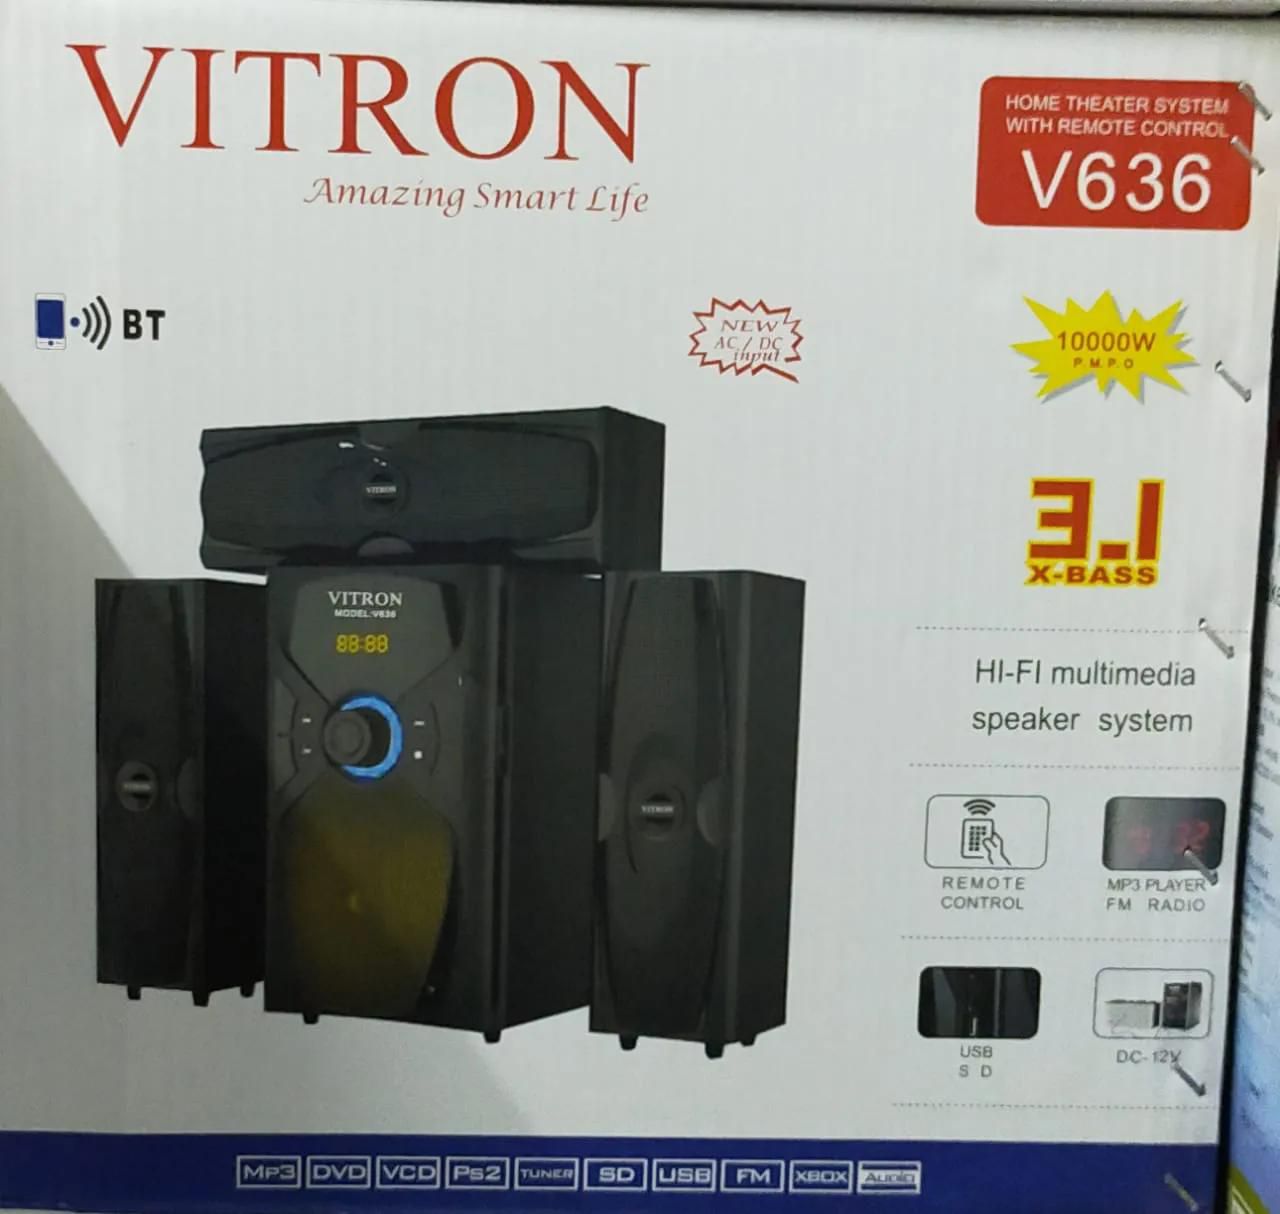 Special offer for the new brand vitron 3.1 3D+FREE EXTENSION GREAT SOUNDS  AND  BASS speaker